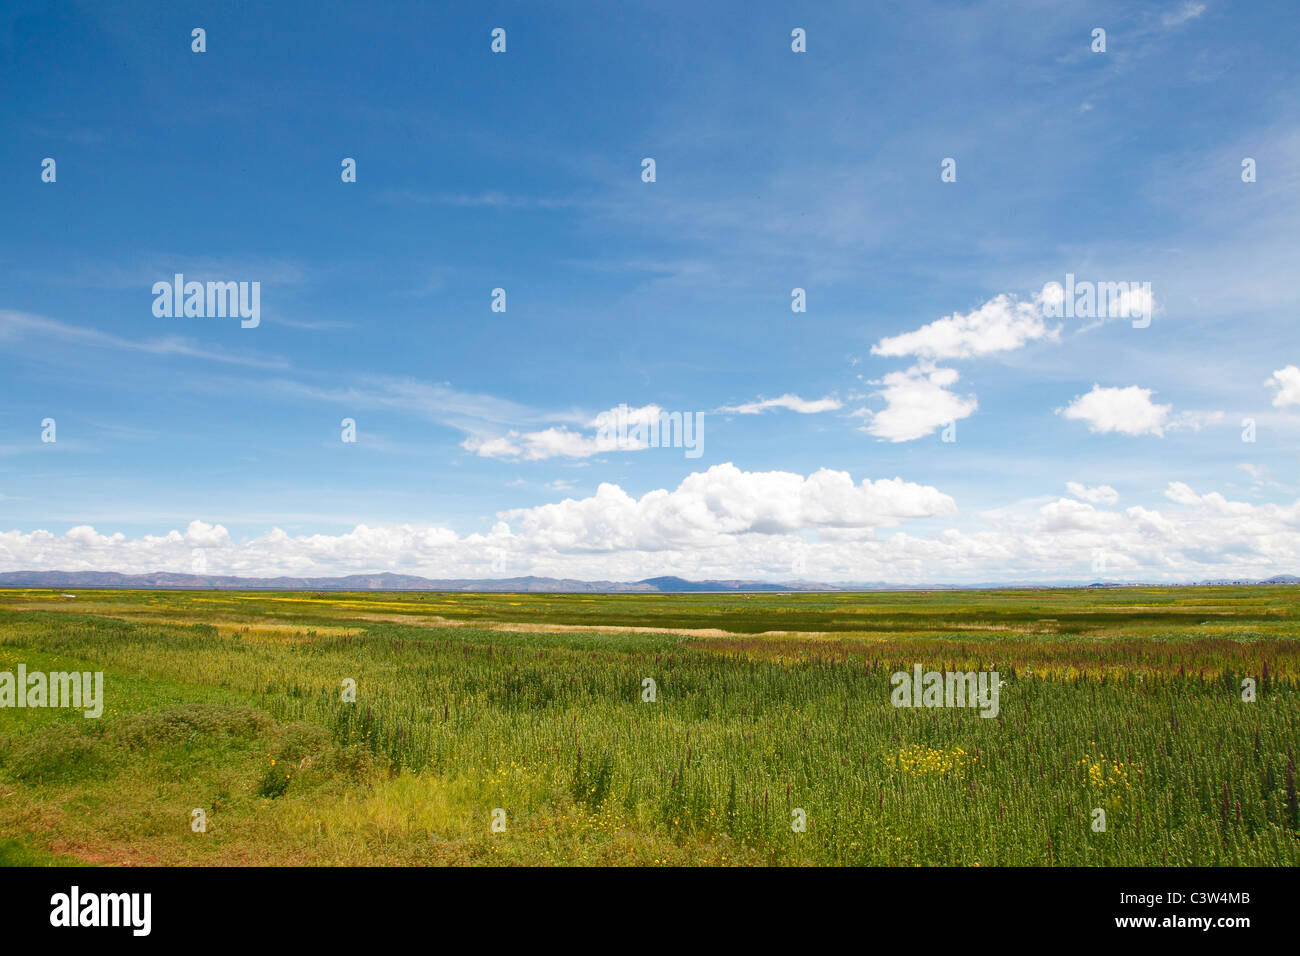 Field and mountain range, Andes, Peru Stock Photo